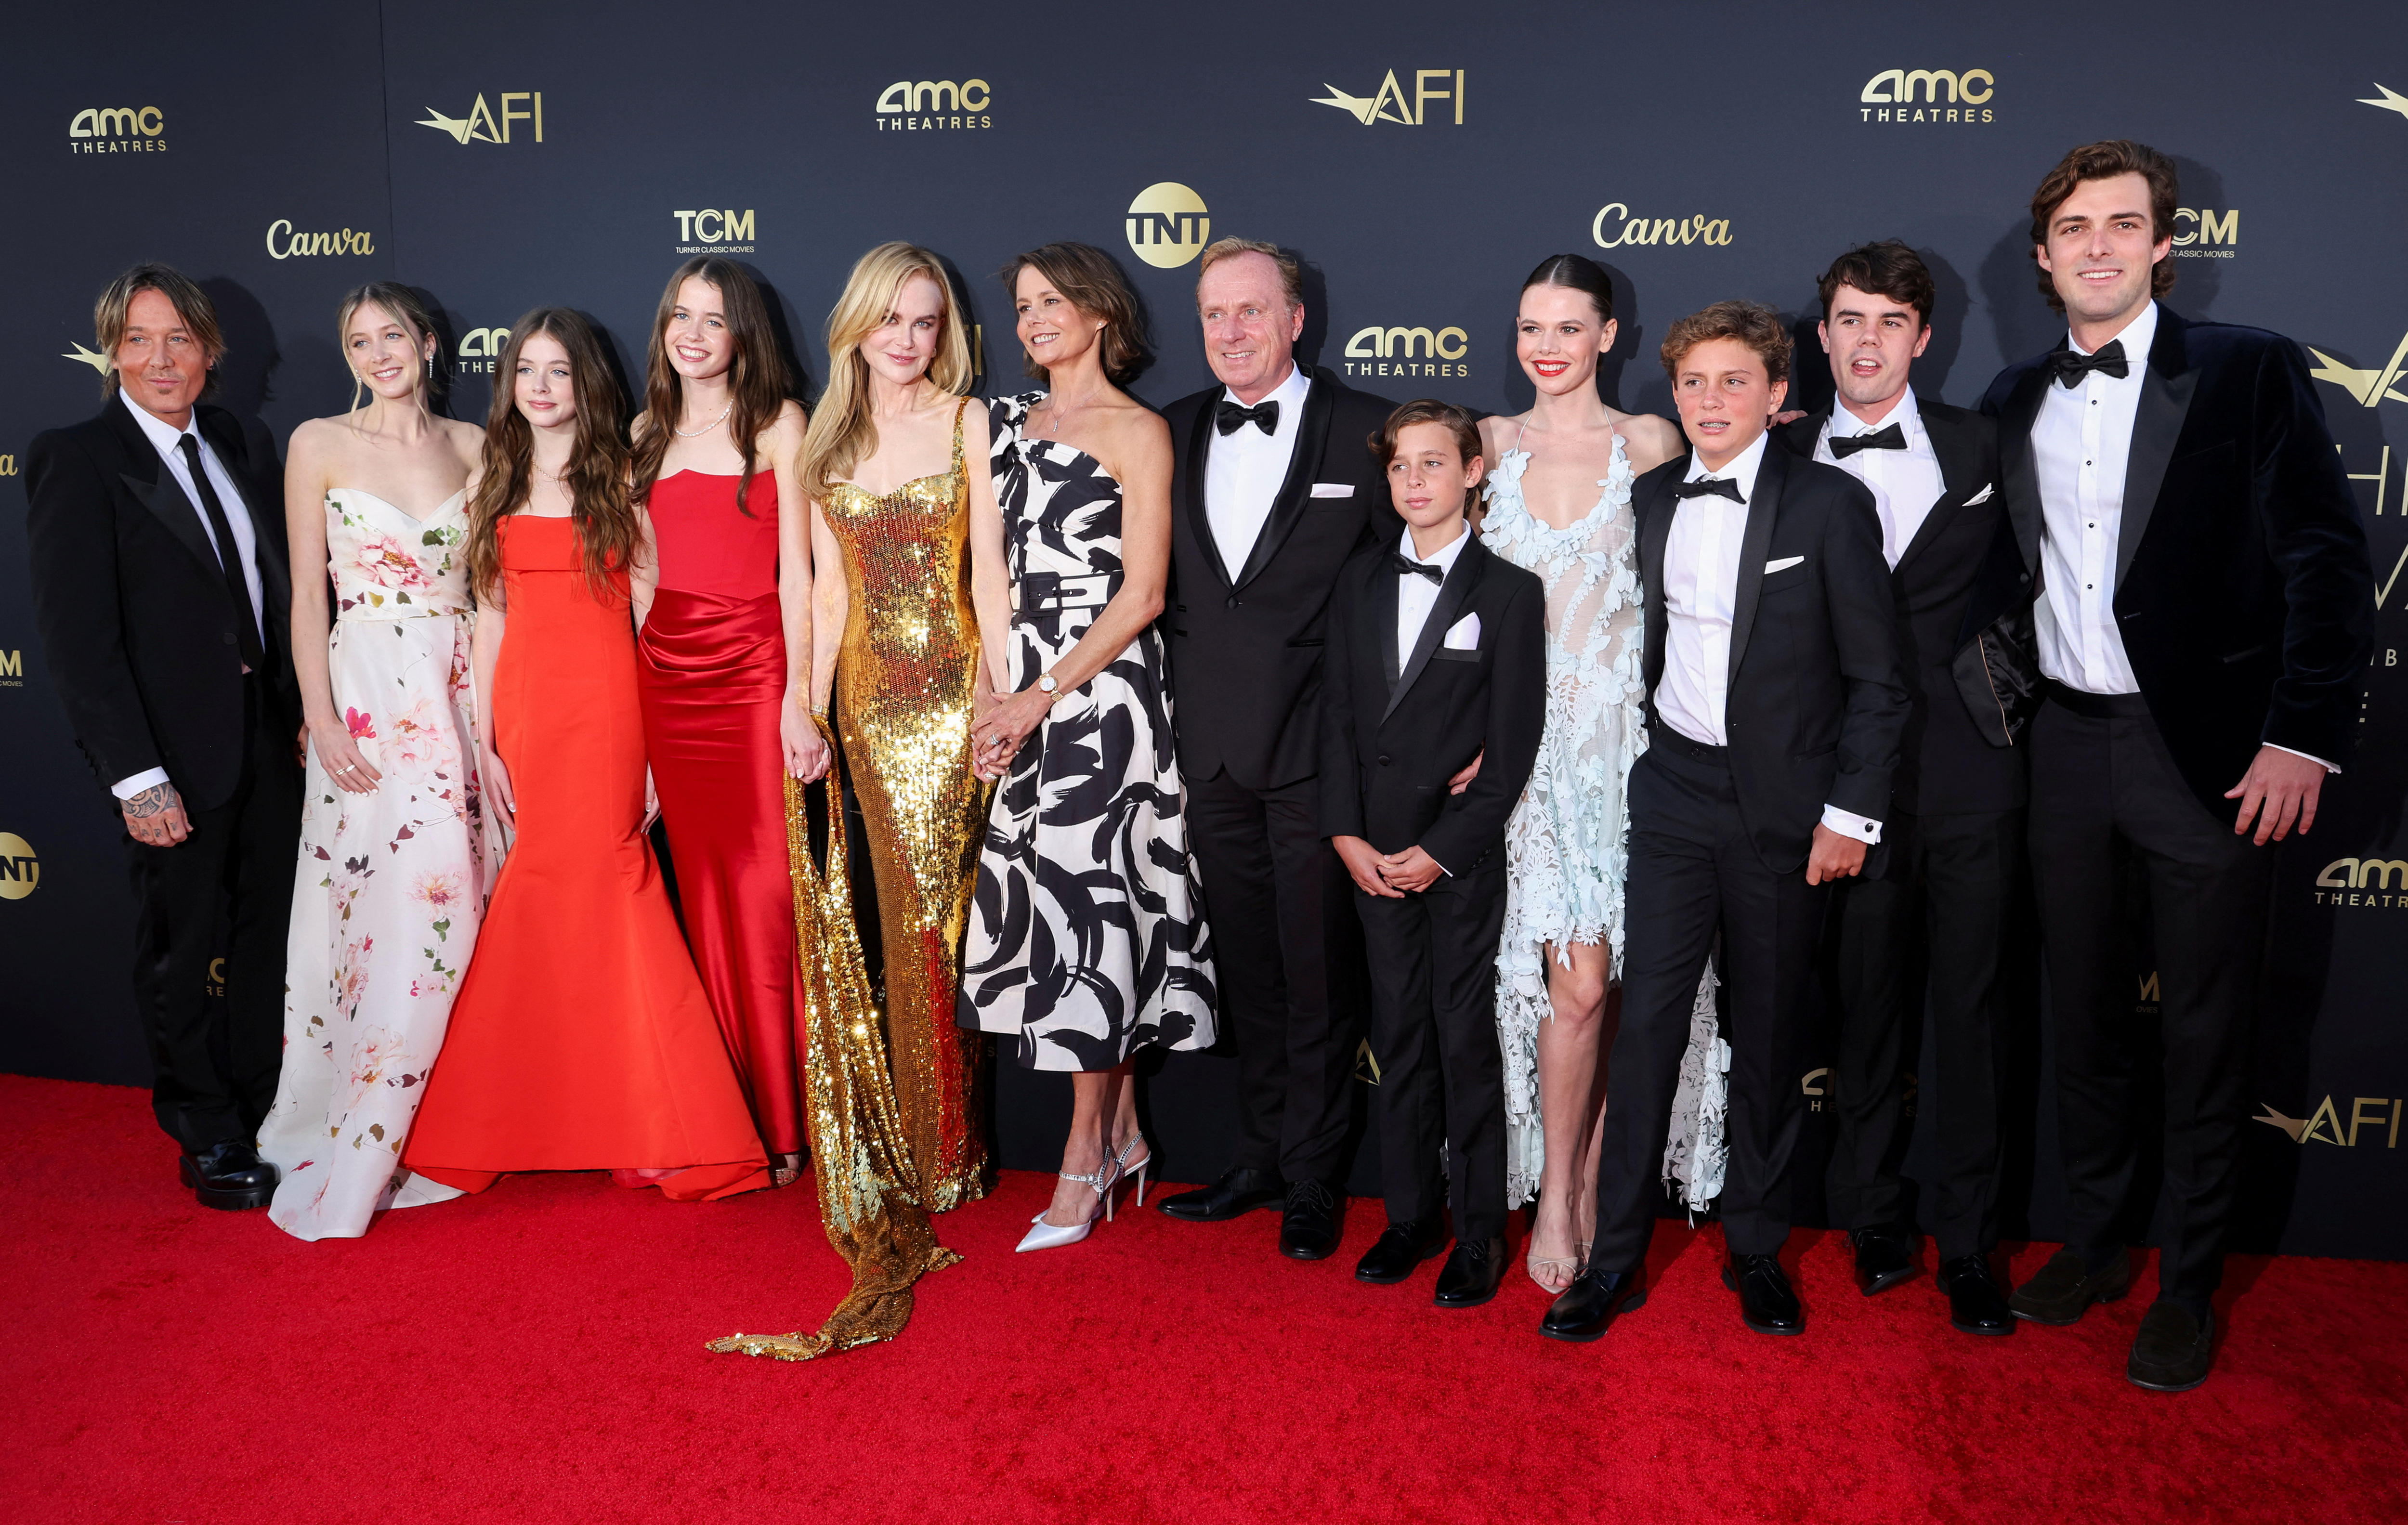 A large group family photo of Nicole Kidman, Keith Urban, their children and extended family